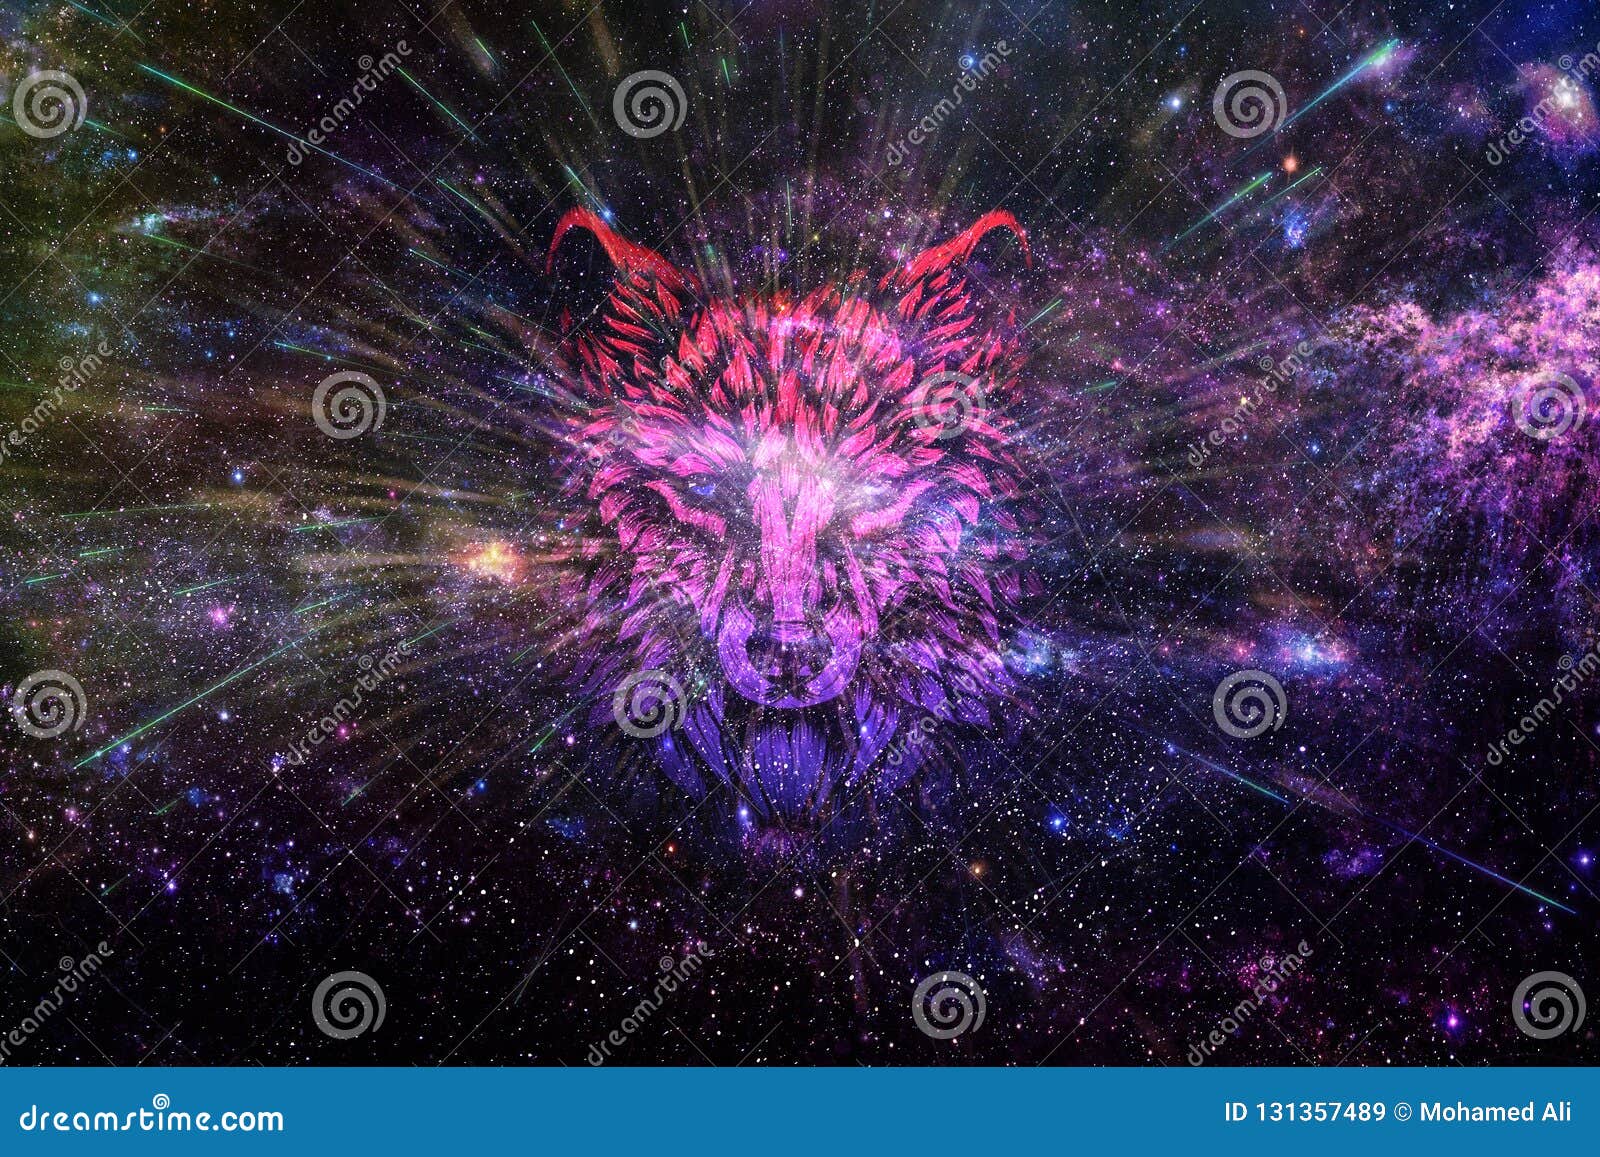 Wolf Galaxy Galaxy Background Pictures